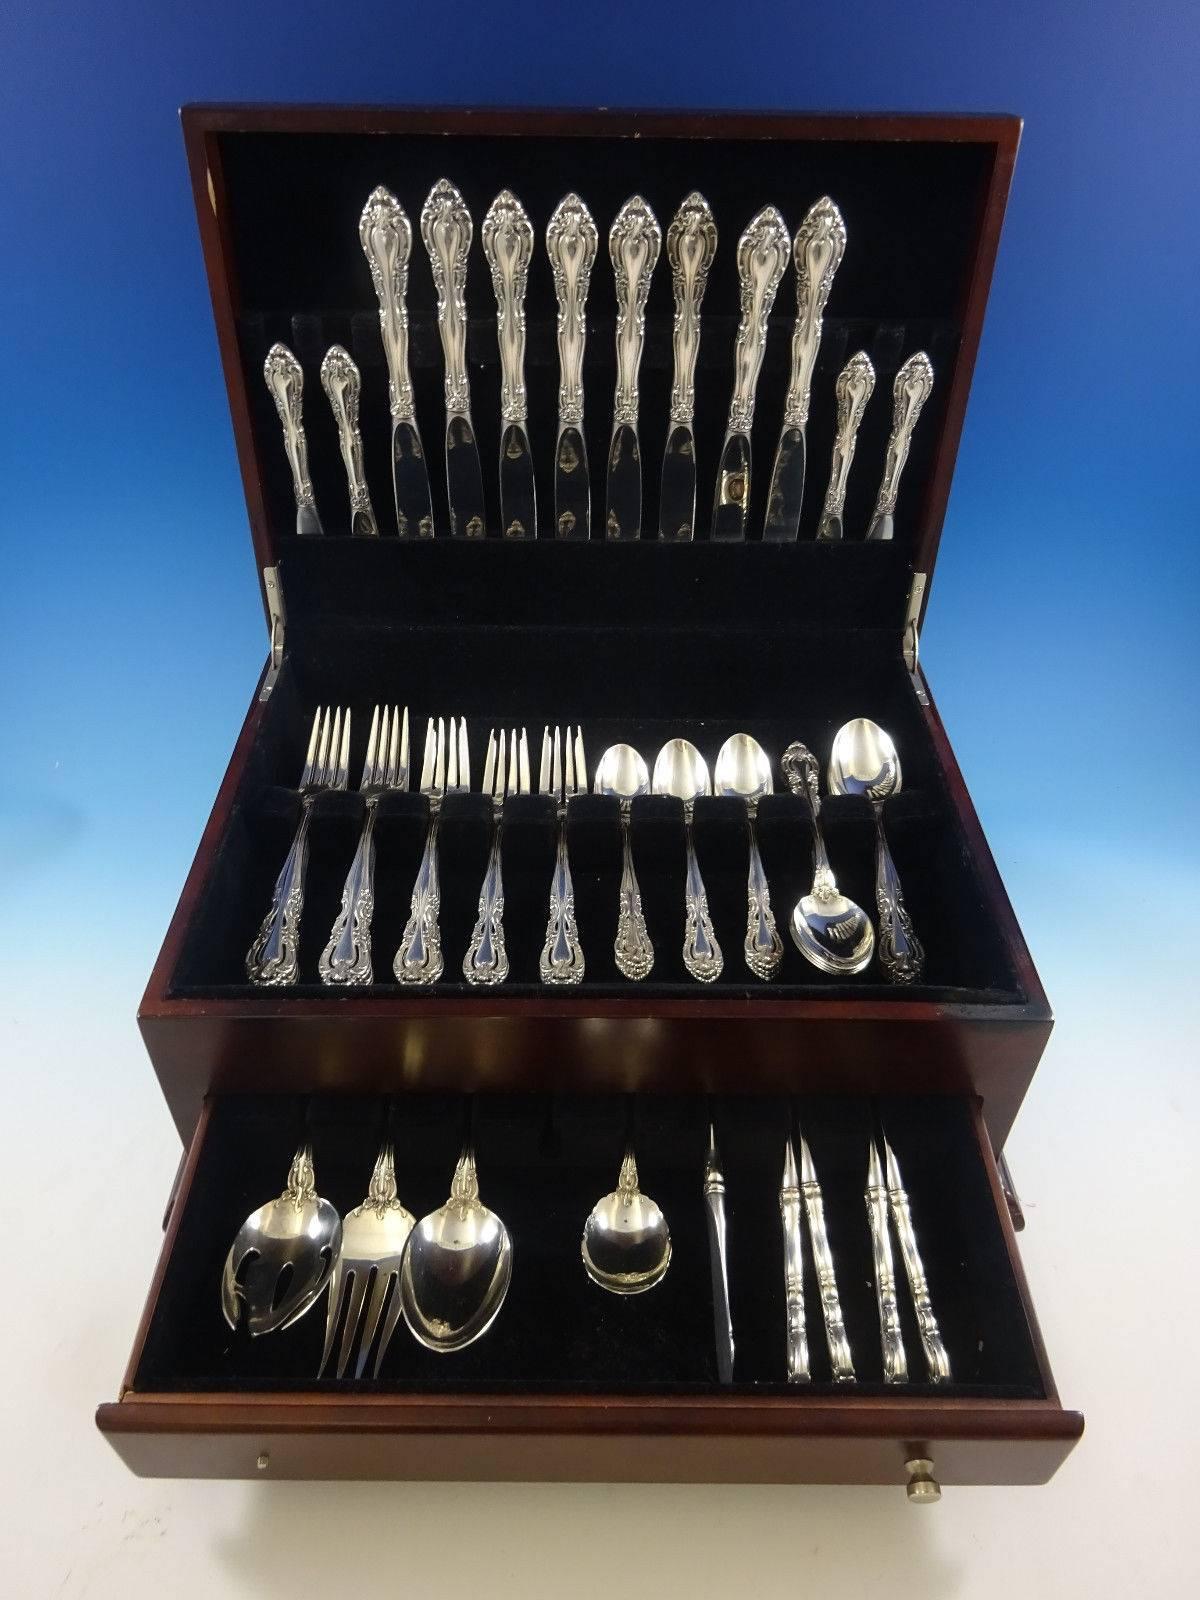 This set includes:

Eight place knives, 9 1/4